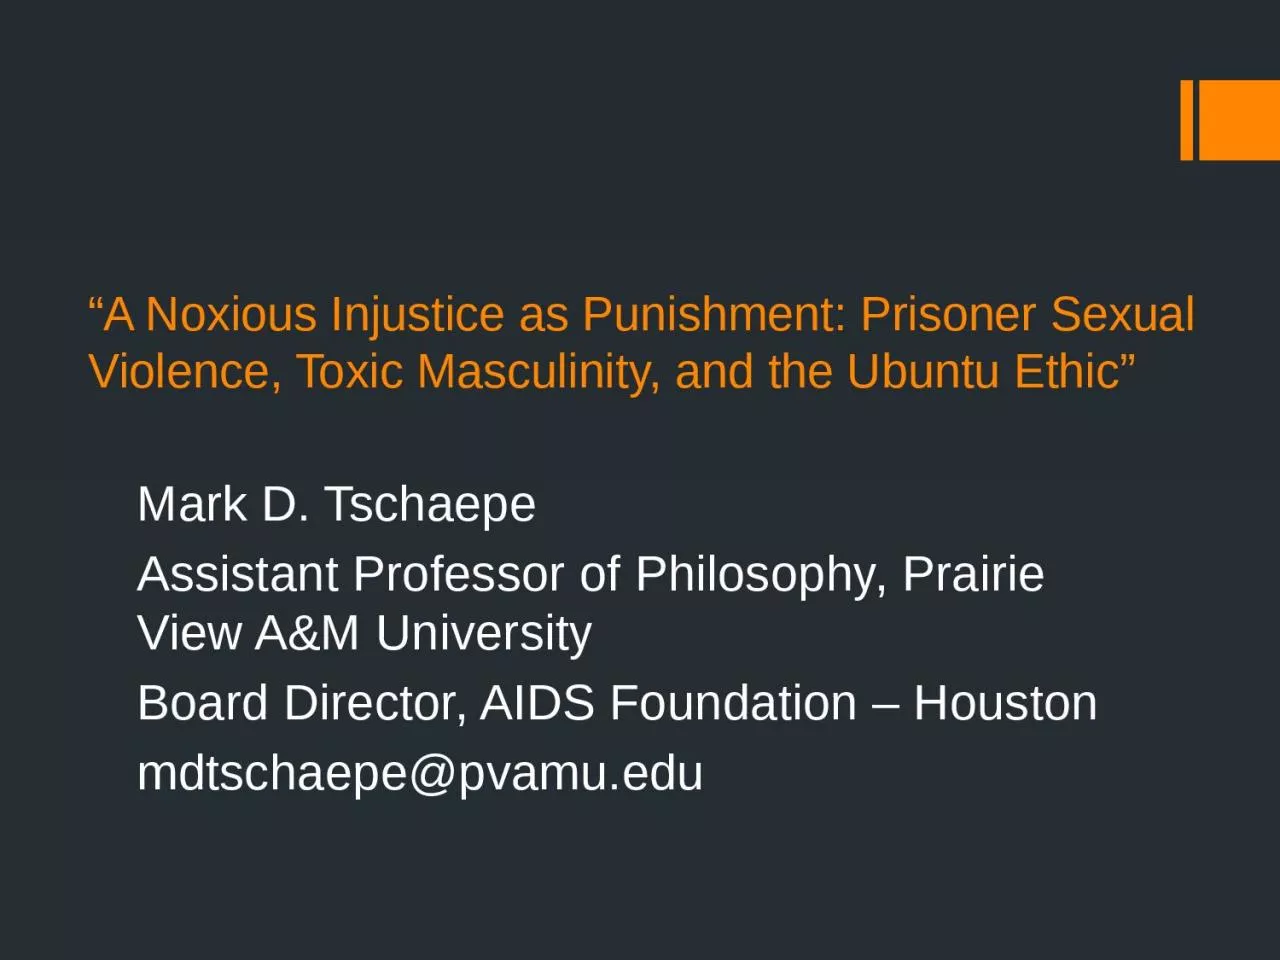 “A Noxious Injustice as Punishment: Prisoner Sexual Violence, Toxic Masculinity, and